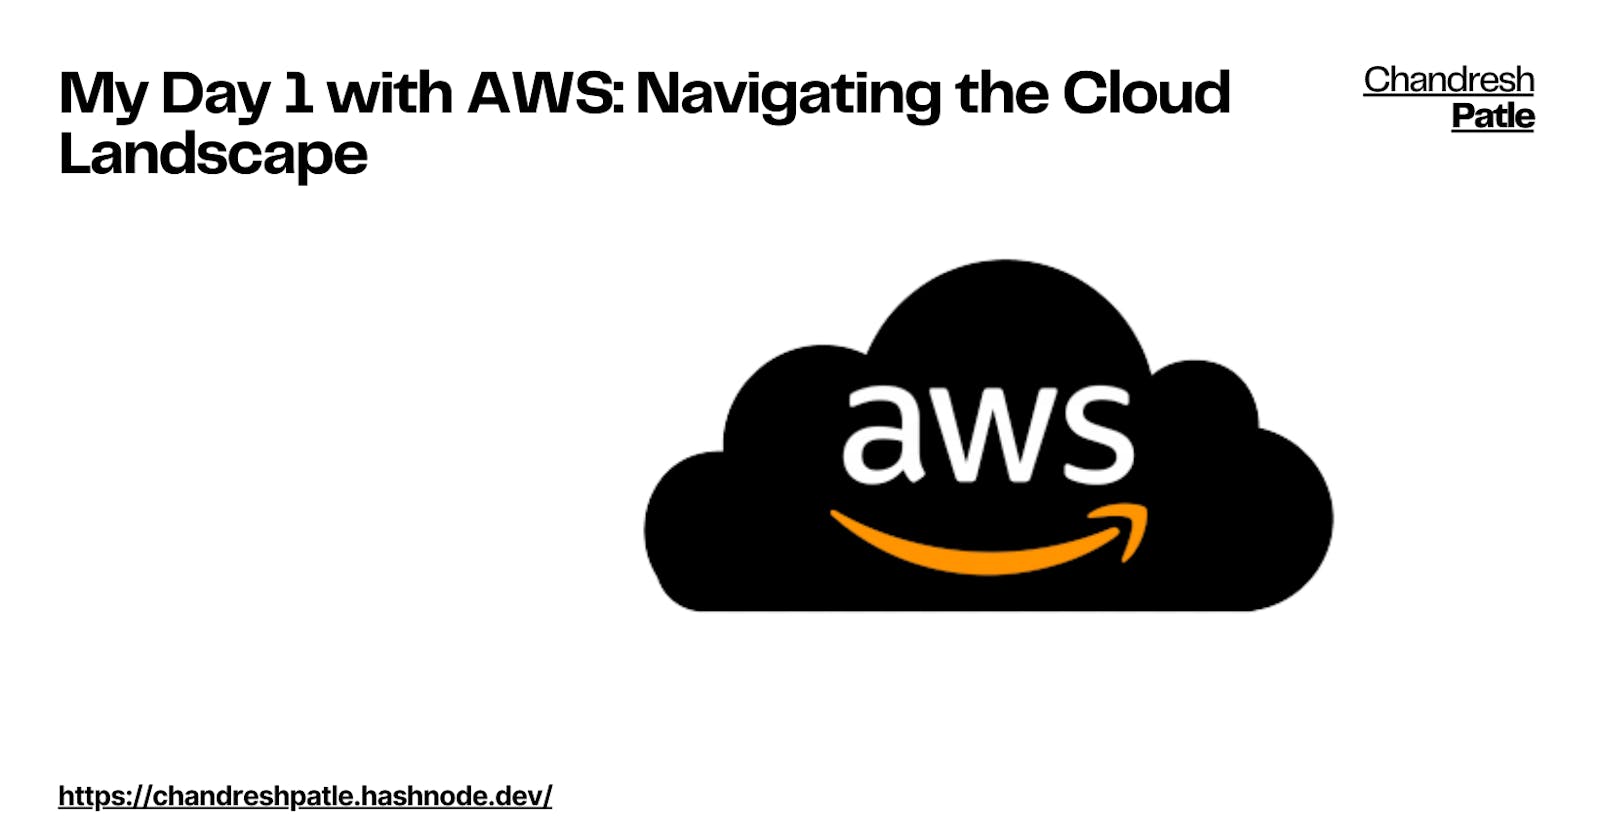 Day 1 with AWS: Navigating the Cloud Landscape